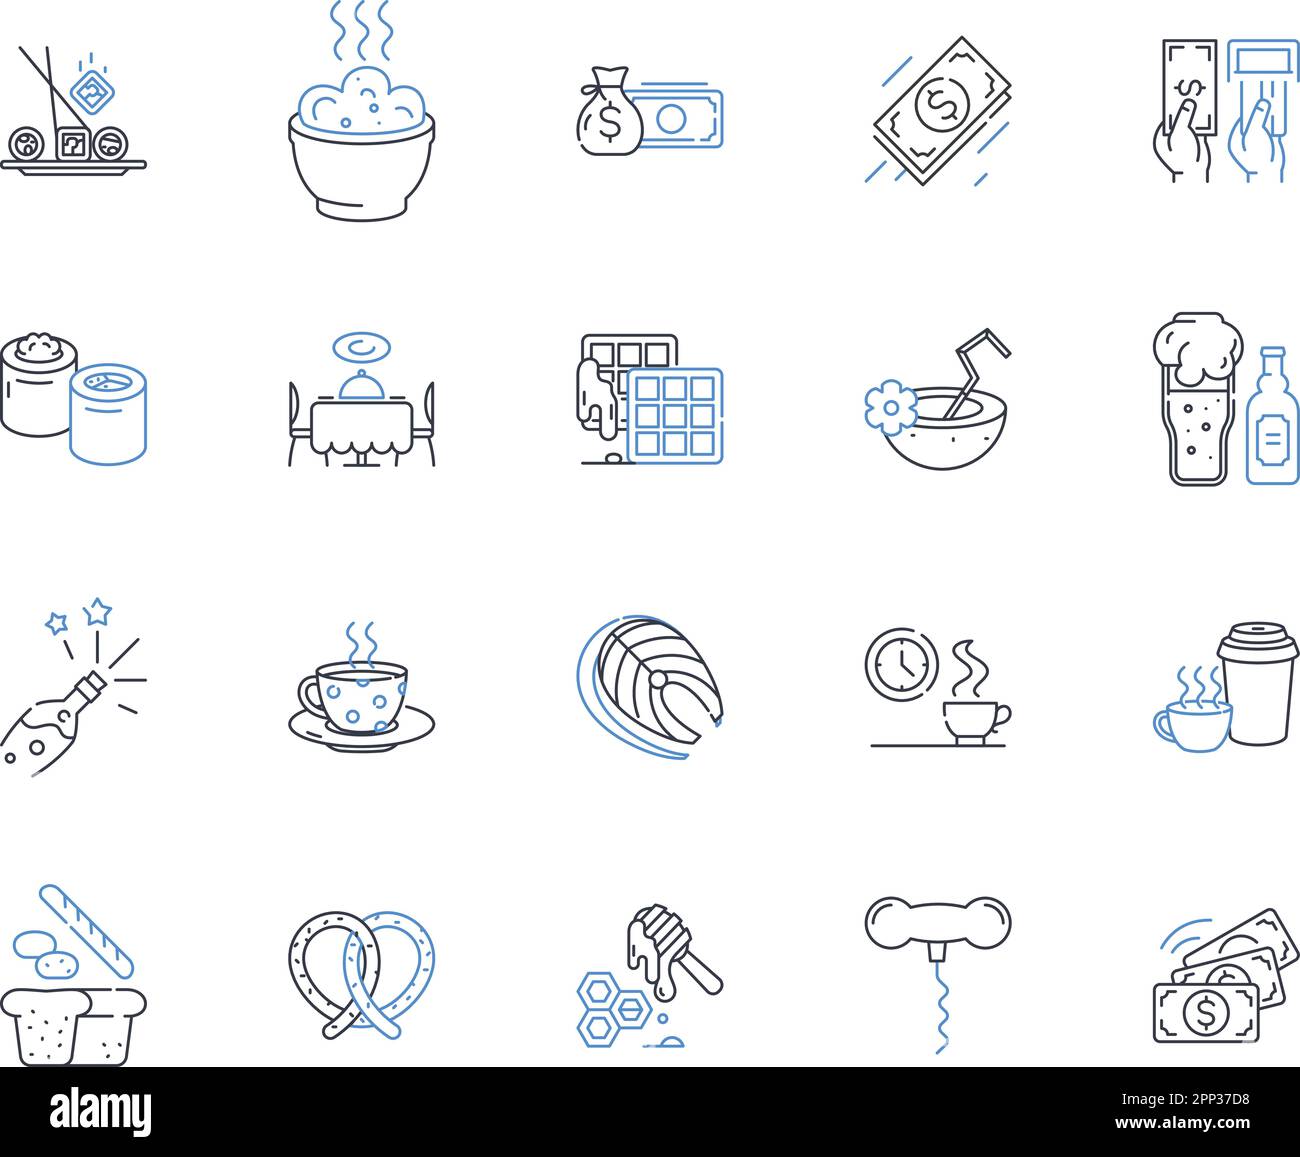 Dining room administration line icons collection. Seating, Menus, Waitstaff, Reservations, Service, Plating, Tableware vector and linear illustration Stock Vector